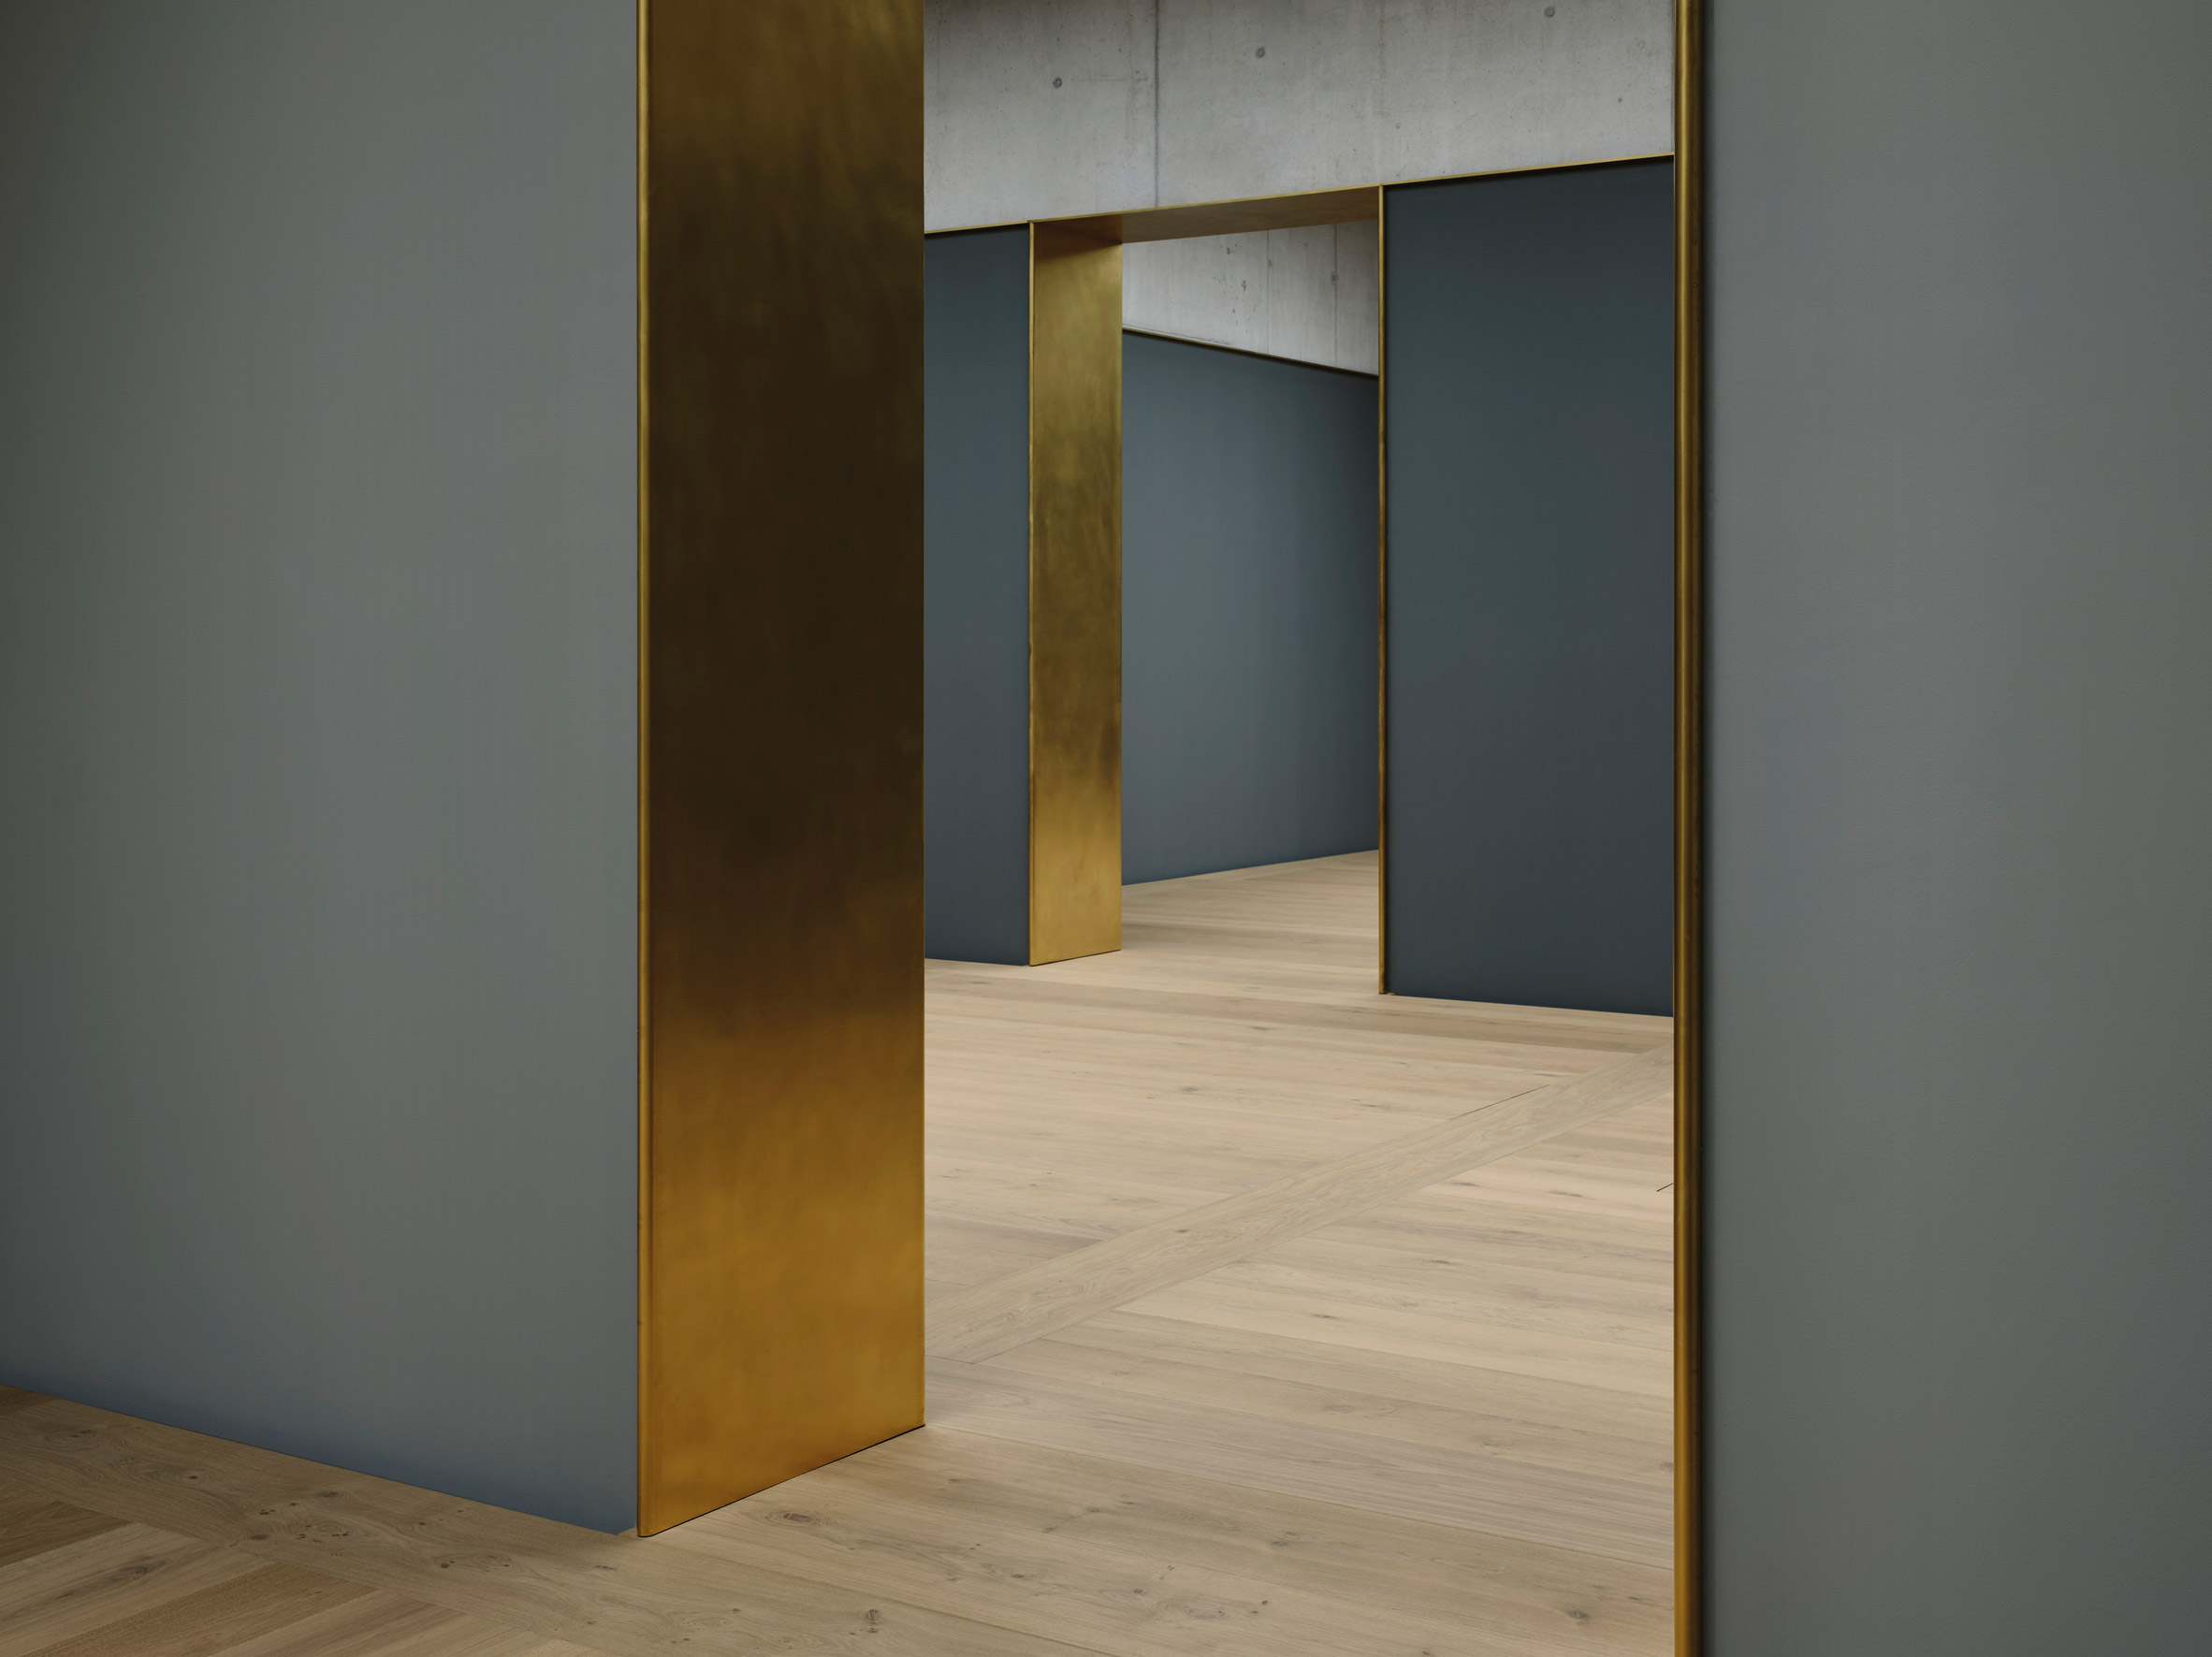 A grey-walled gallery inside of the Kunsthaus Zurich museum extension by David Chipperfield